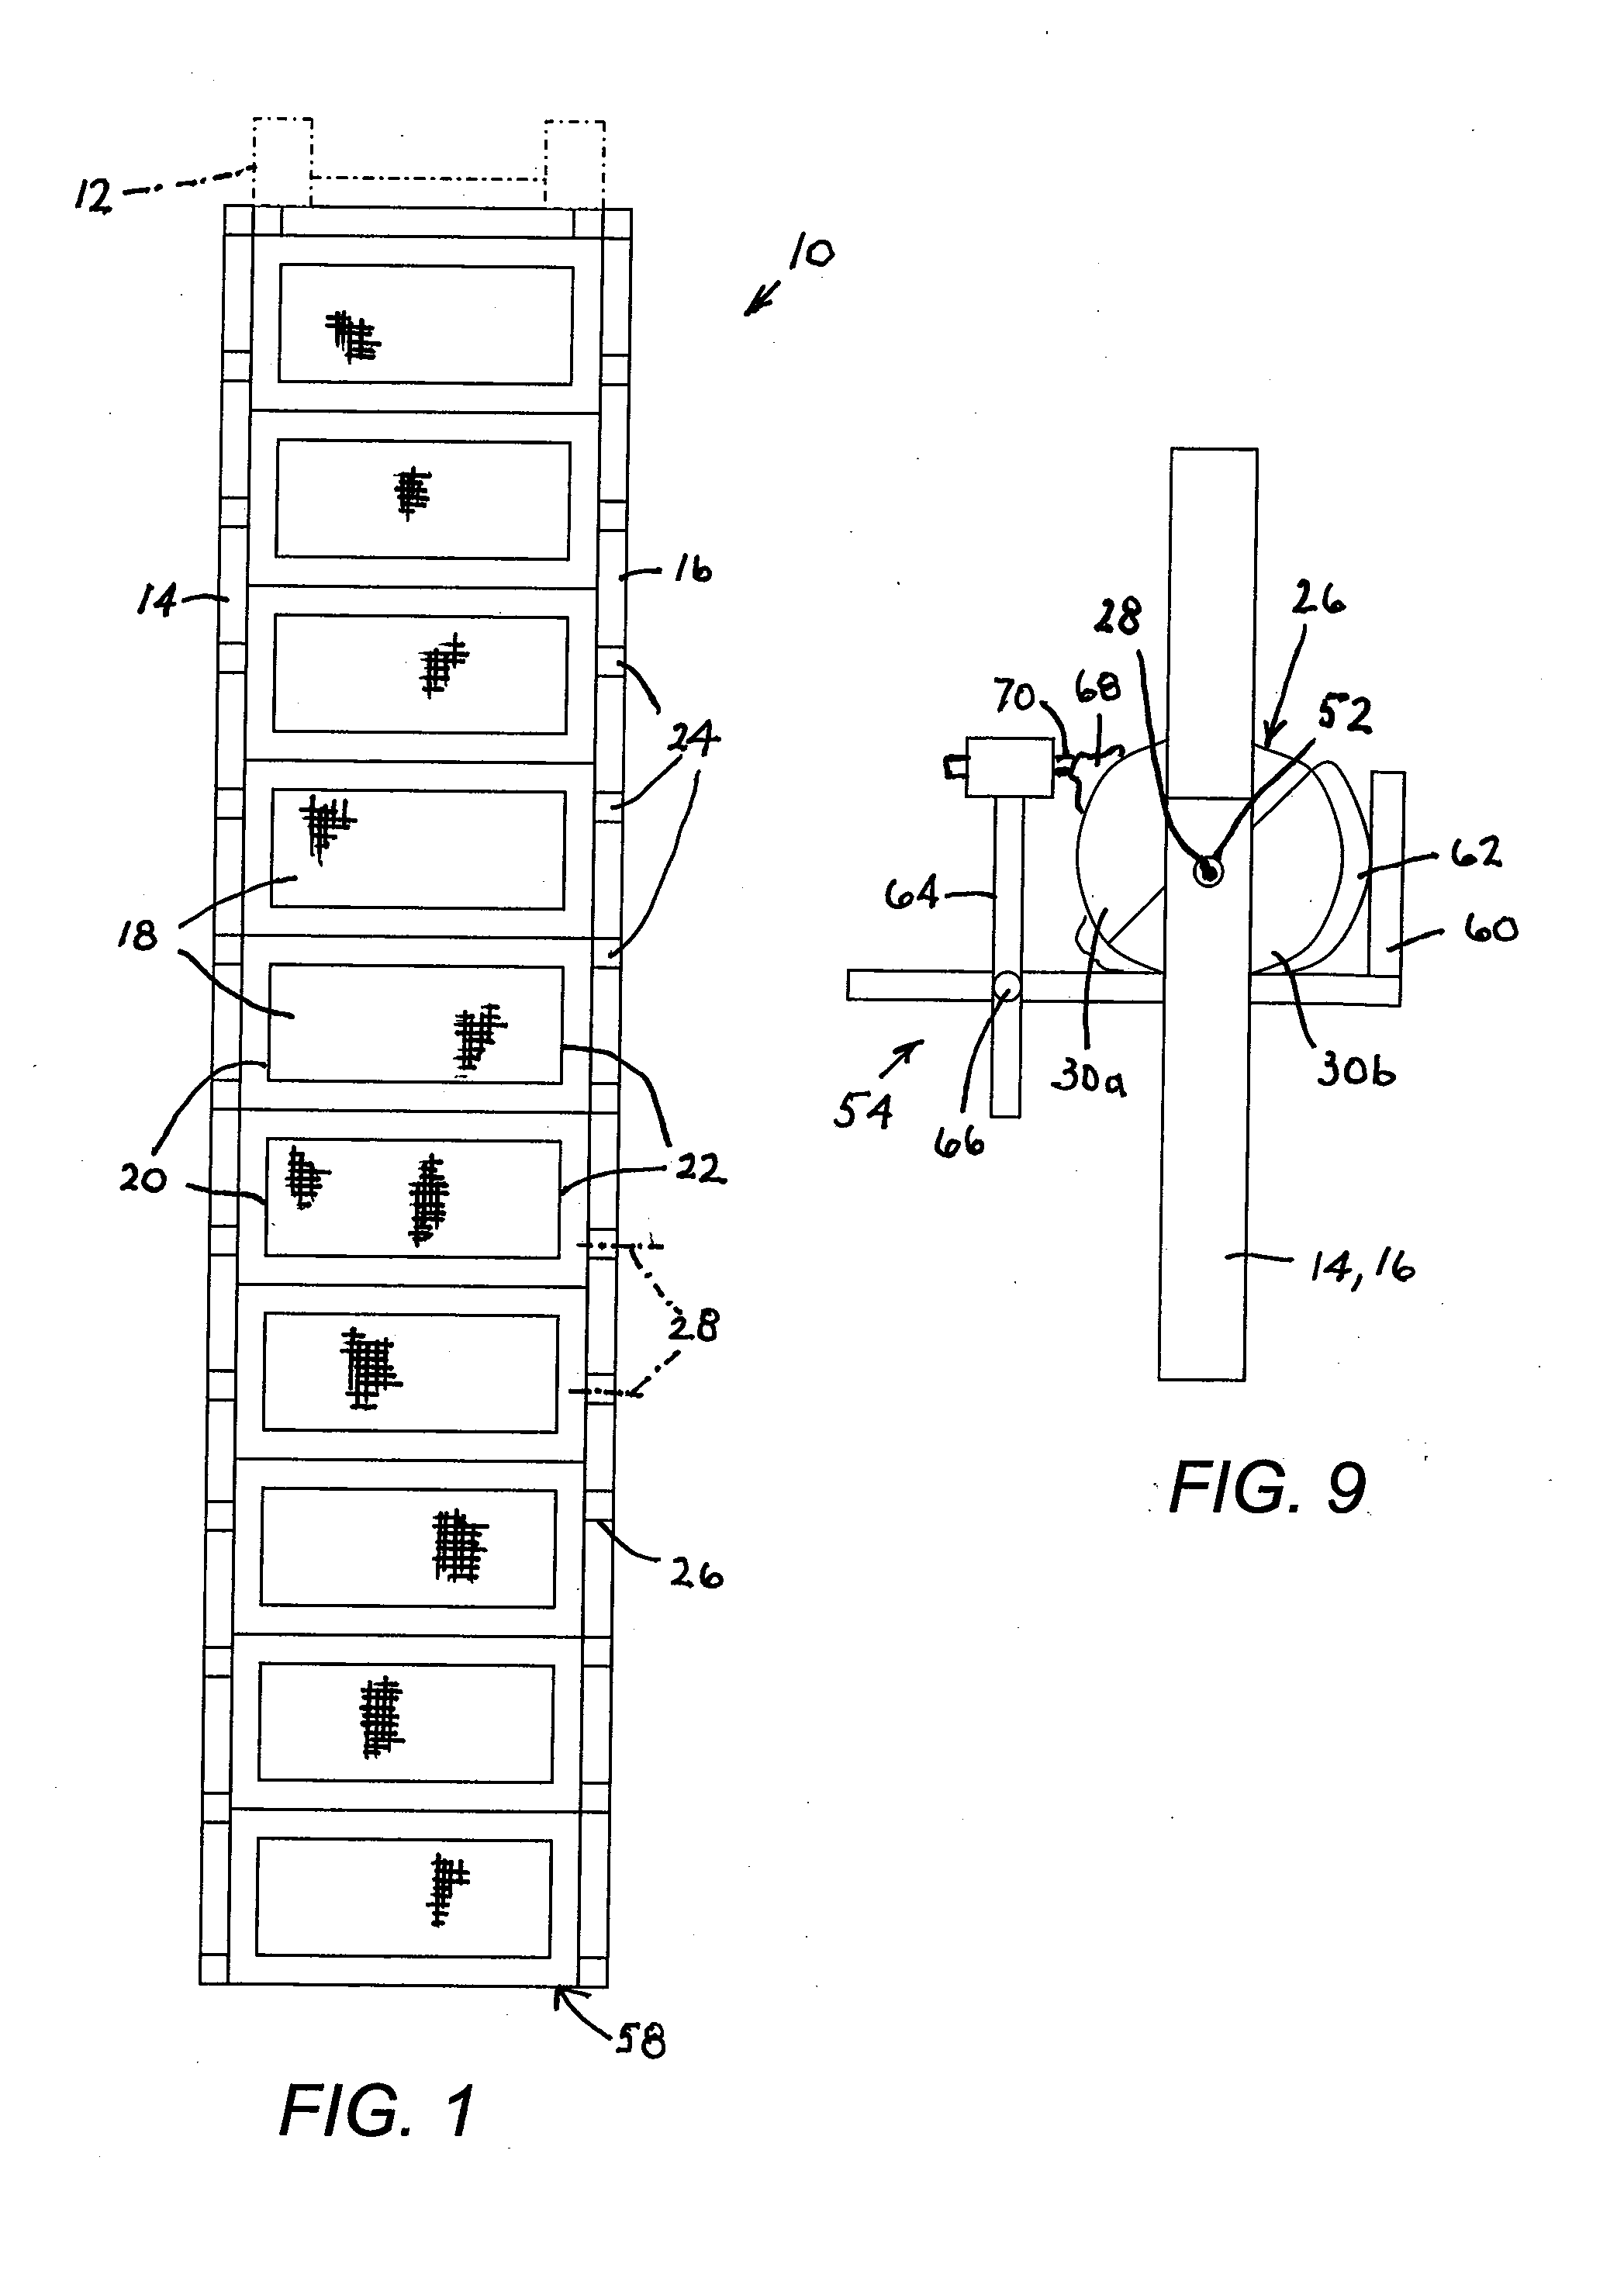 Traveling band screen, associated roller and related method for retrofitting a traveling band screen assembly